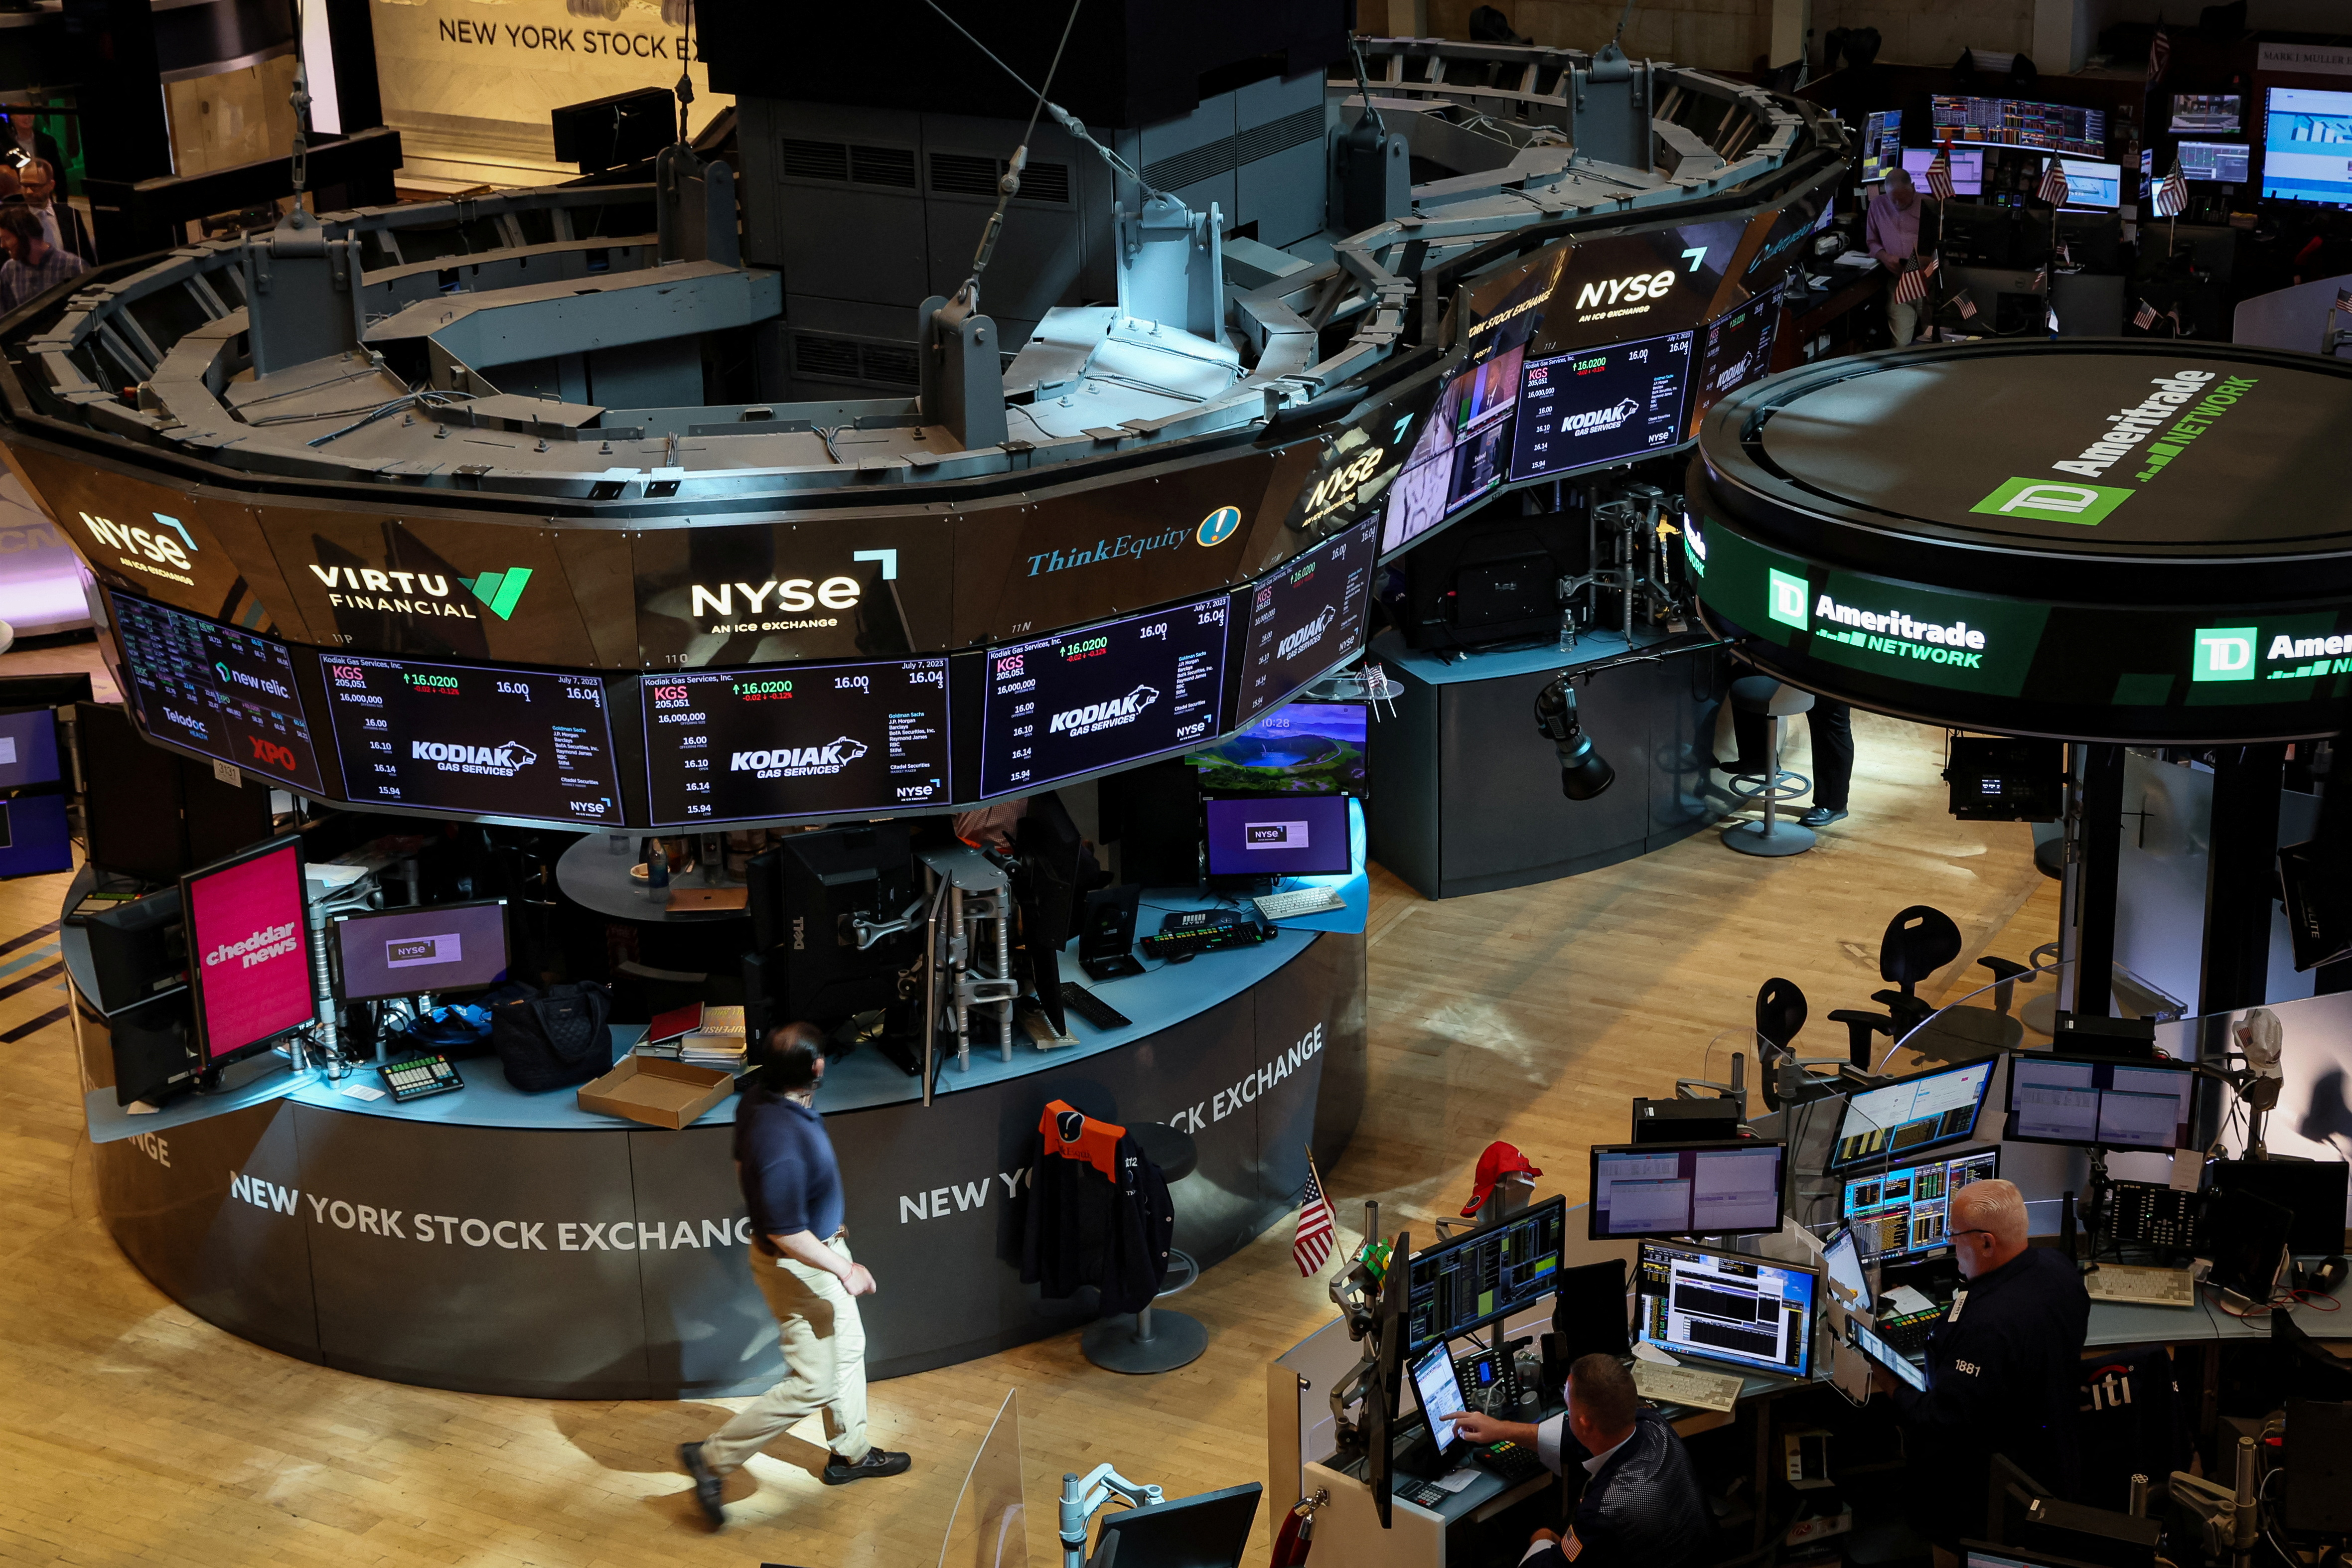 Stock market: New investors should know what's next for stocks